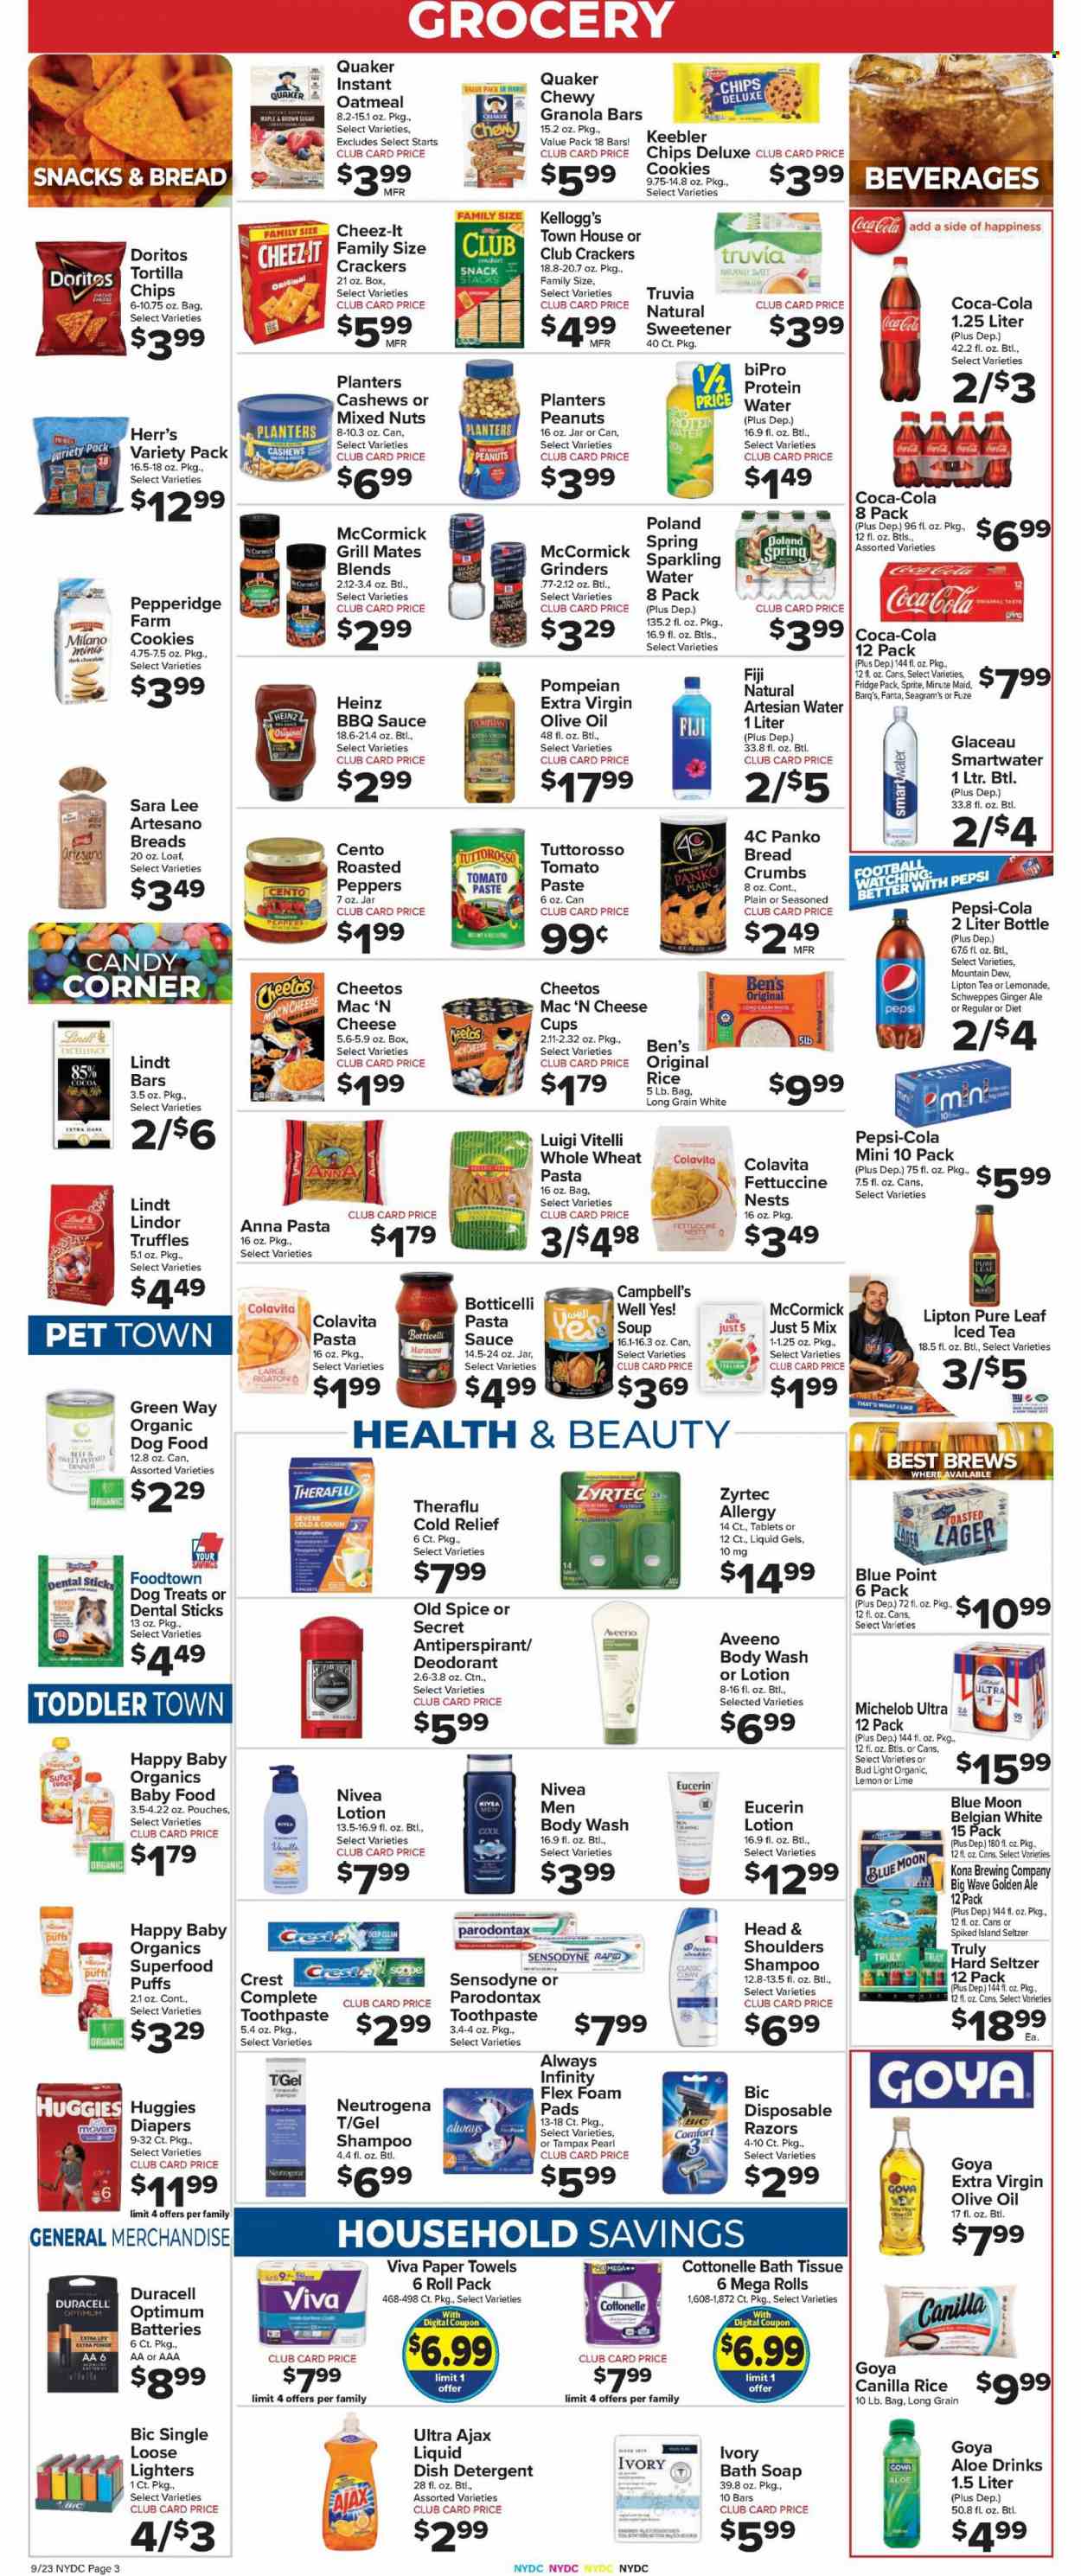 thumbnail - Foodtown Flyer - 09/23/2022 - 09/29/2022 - Sales products - Sara Lee, puffs, breadcrumbs, panko breadcrumbs, peppers, Campbell's, pasta sauce, soup, sauce, Quaker, cheese cup, cheese, cookies, chocolate, snack, Lindt, Lindor, truffles, crackers, Kellogg's, dark chocolate, Keebler, Doritos, tortilla chips, Cheetos, chips, Cheez-It, oatmeal, sweetener, tomato paste, Heinz, Goya, granola bar, rice, spice, BBQ sauce, extra virgin olive oil, olive oil, oil, cashews, peanuts, mixed nuts, Planters, Coca-Cola, ginger ale, lemonade, Mountain Dew, Schweppes, Sprite, Pepsi, Fanta, Lipton, ice tea, fruit punch, sparkling water, Smartwater, Pure Leaf, Hard Seltzer, TRULY, beer, Bud Light, Lager, Huggies, nappies, Aveeno, Nivea, bath tissue, Cottonelle, kitchen towels, paper towels, detergent, Ajax, WAVE, dishwasher cleaner, body wash, shampoo, Old Spice, soap, toothpaste, Sensodyne, Crest, Tampax, Always Infinity, Neutrogena, Head & Shoulders, body lotion, Eucerin, anti-perspirant, deodorant, BIC, disposable razor, cup, battery, Duracell, alkaline batteries, DVD, animal food, dog food, Optimum, Theraflu, Zyrtec, Blue Moon, Michelob. Page 5.